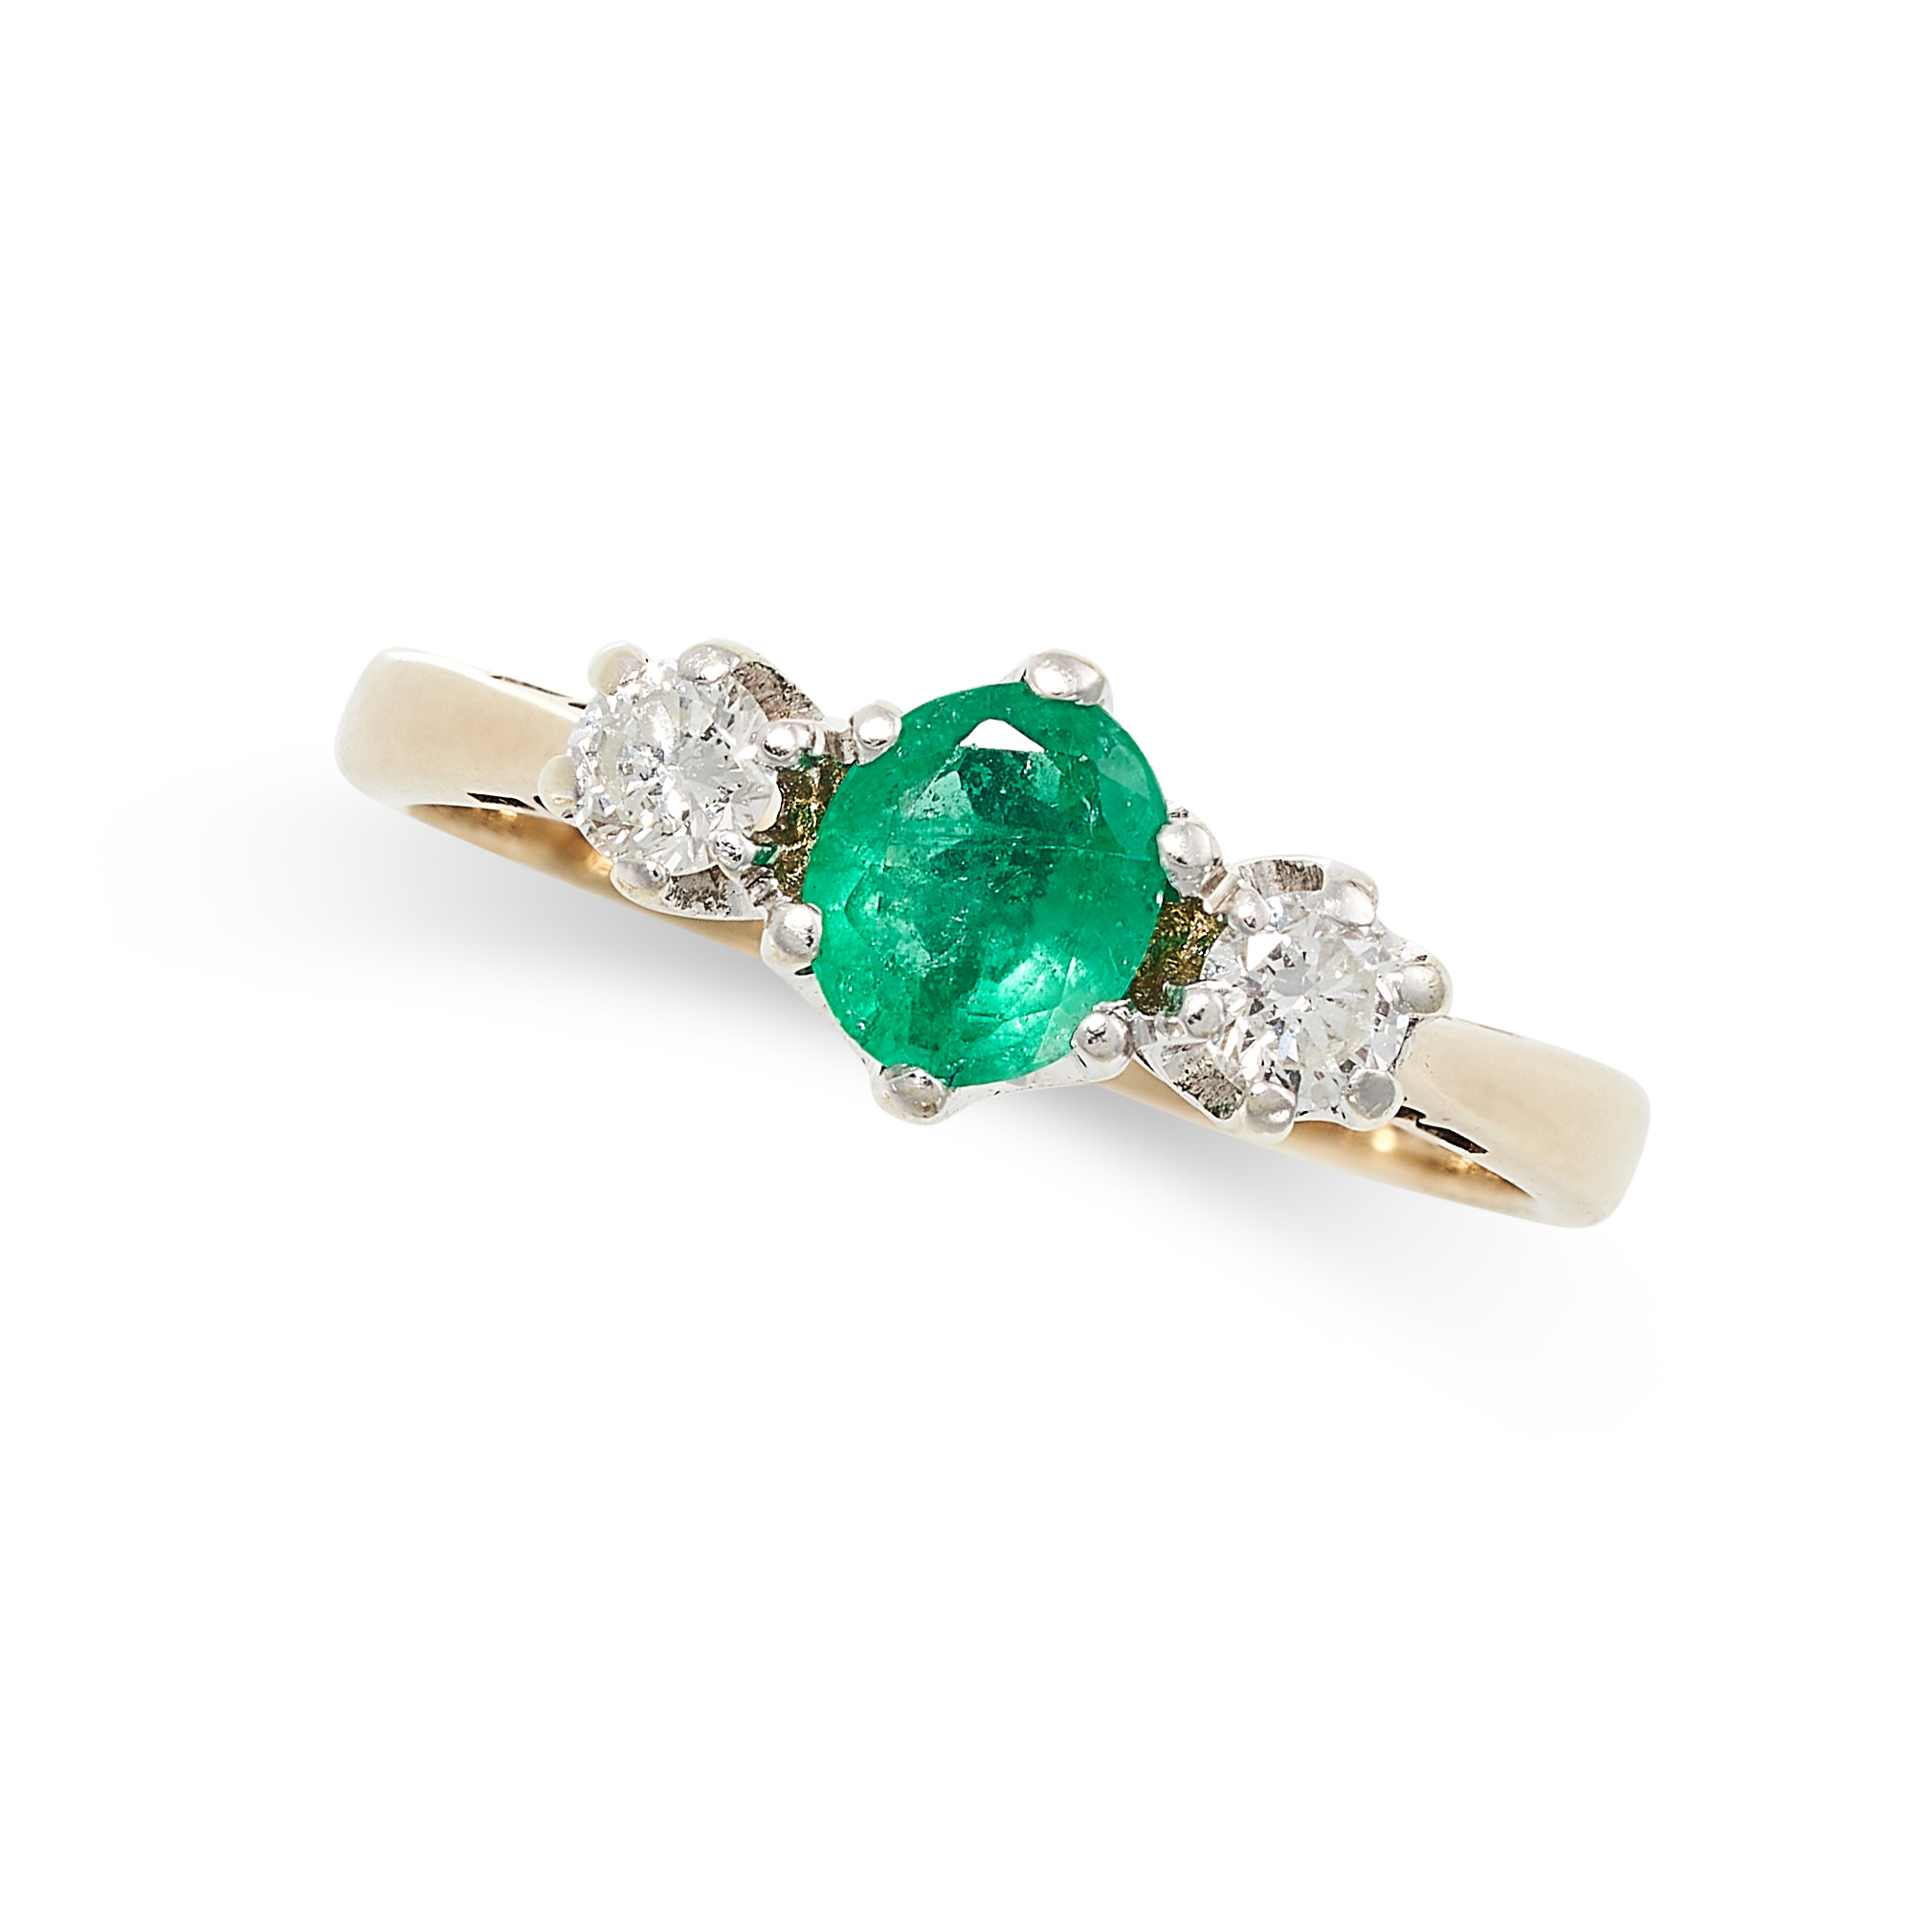 AN EMERALD AND DIAMOND THREE STONE RING in 9ct yellow gold, set with an oval cut emerald between two